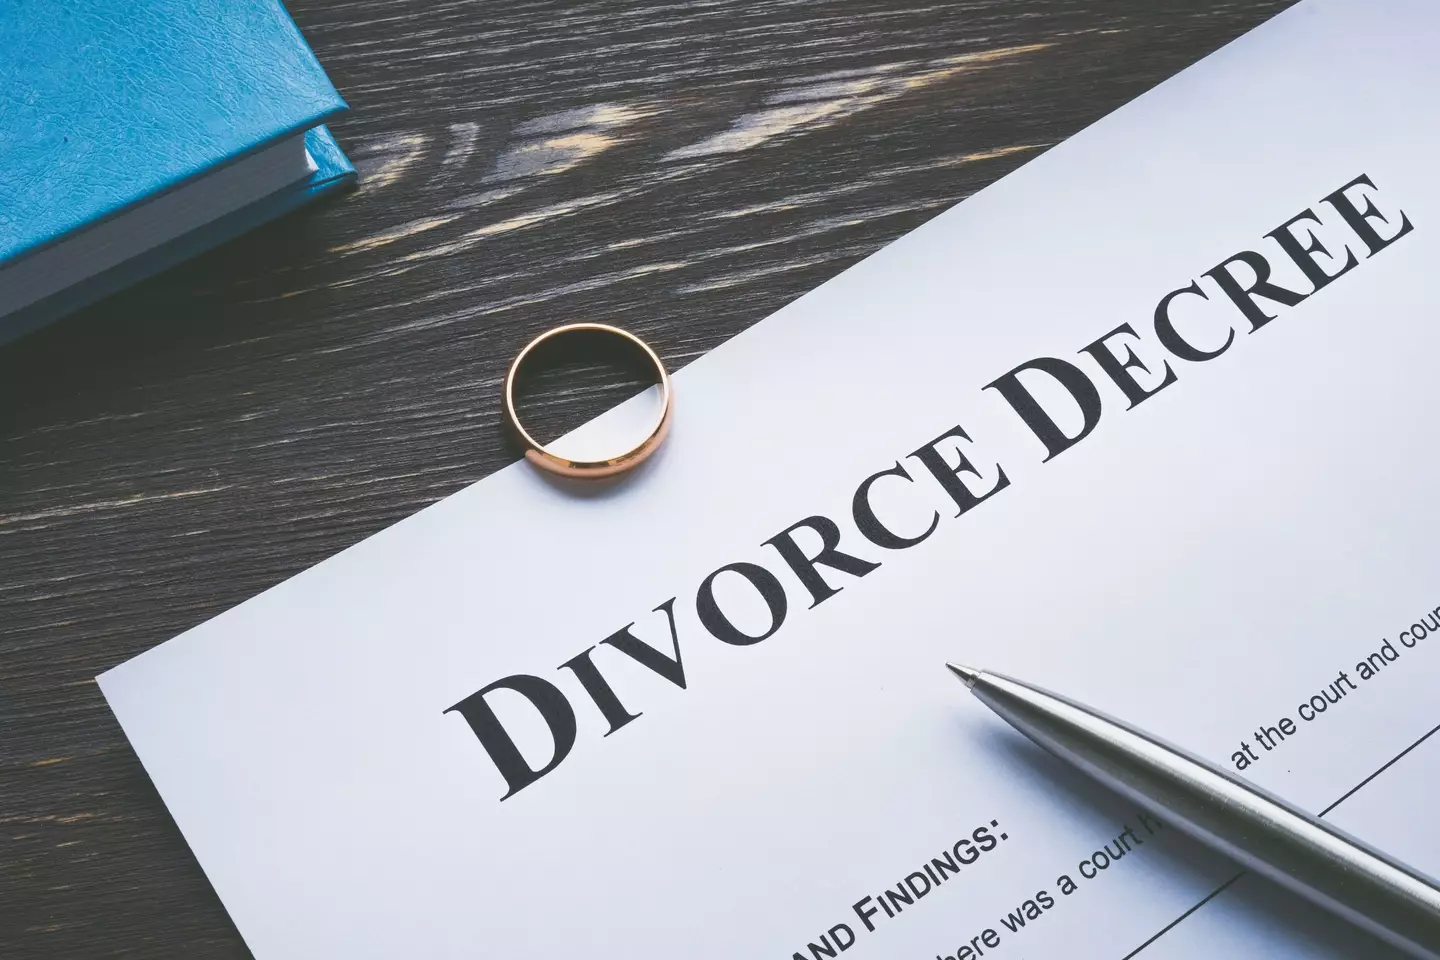 The heartbreaking revelation has led to the woman wanting a divorce.